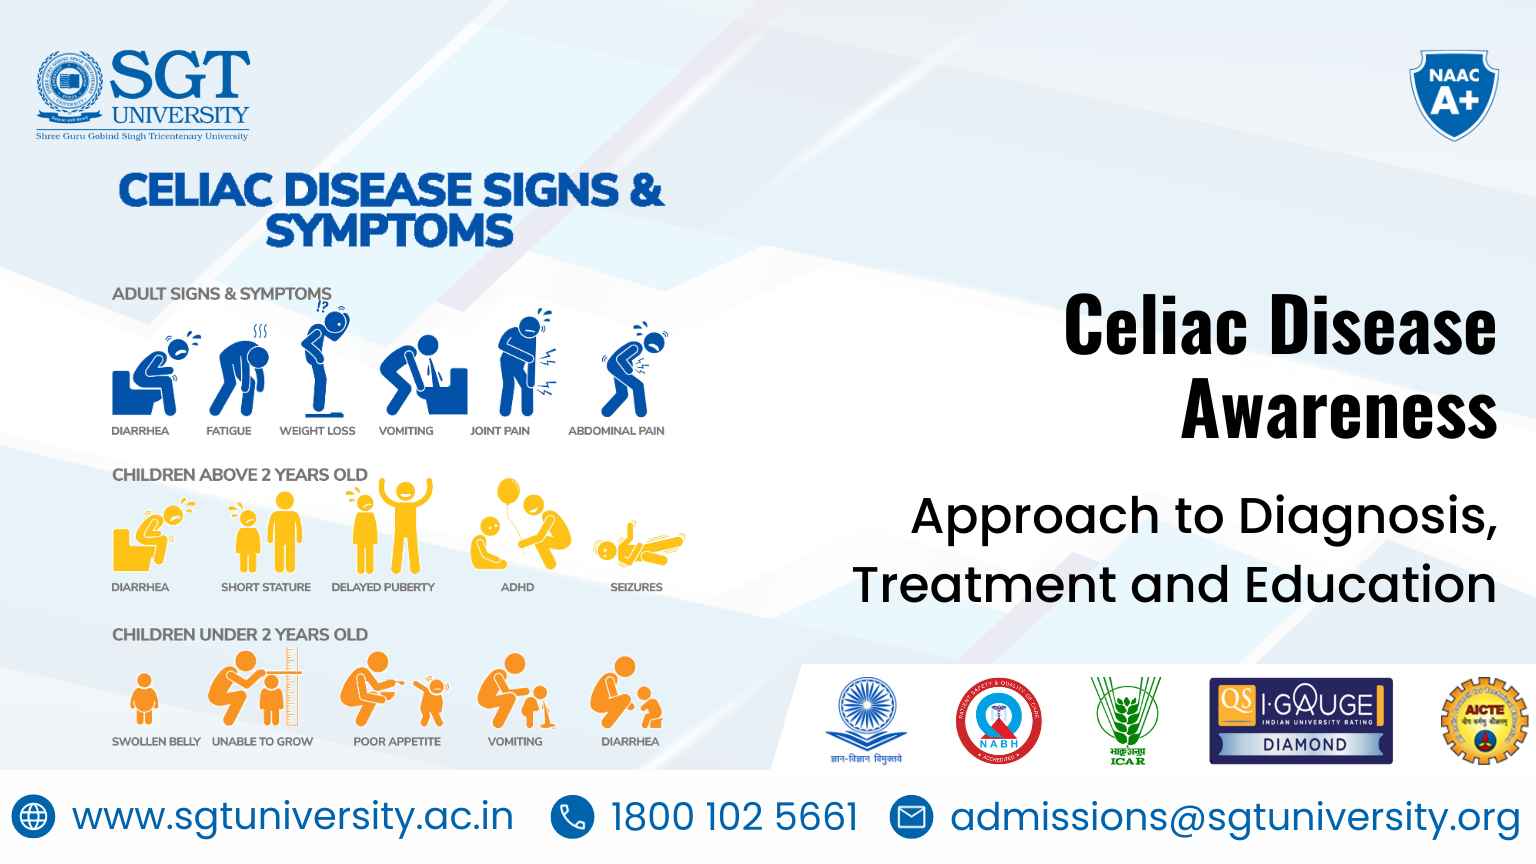 Celiac Disease Awareness: SGT University’s Approach to Diagnosis, Treatment and Education